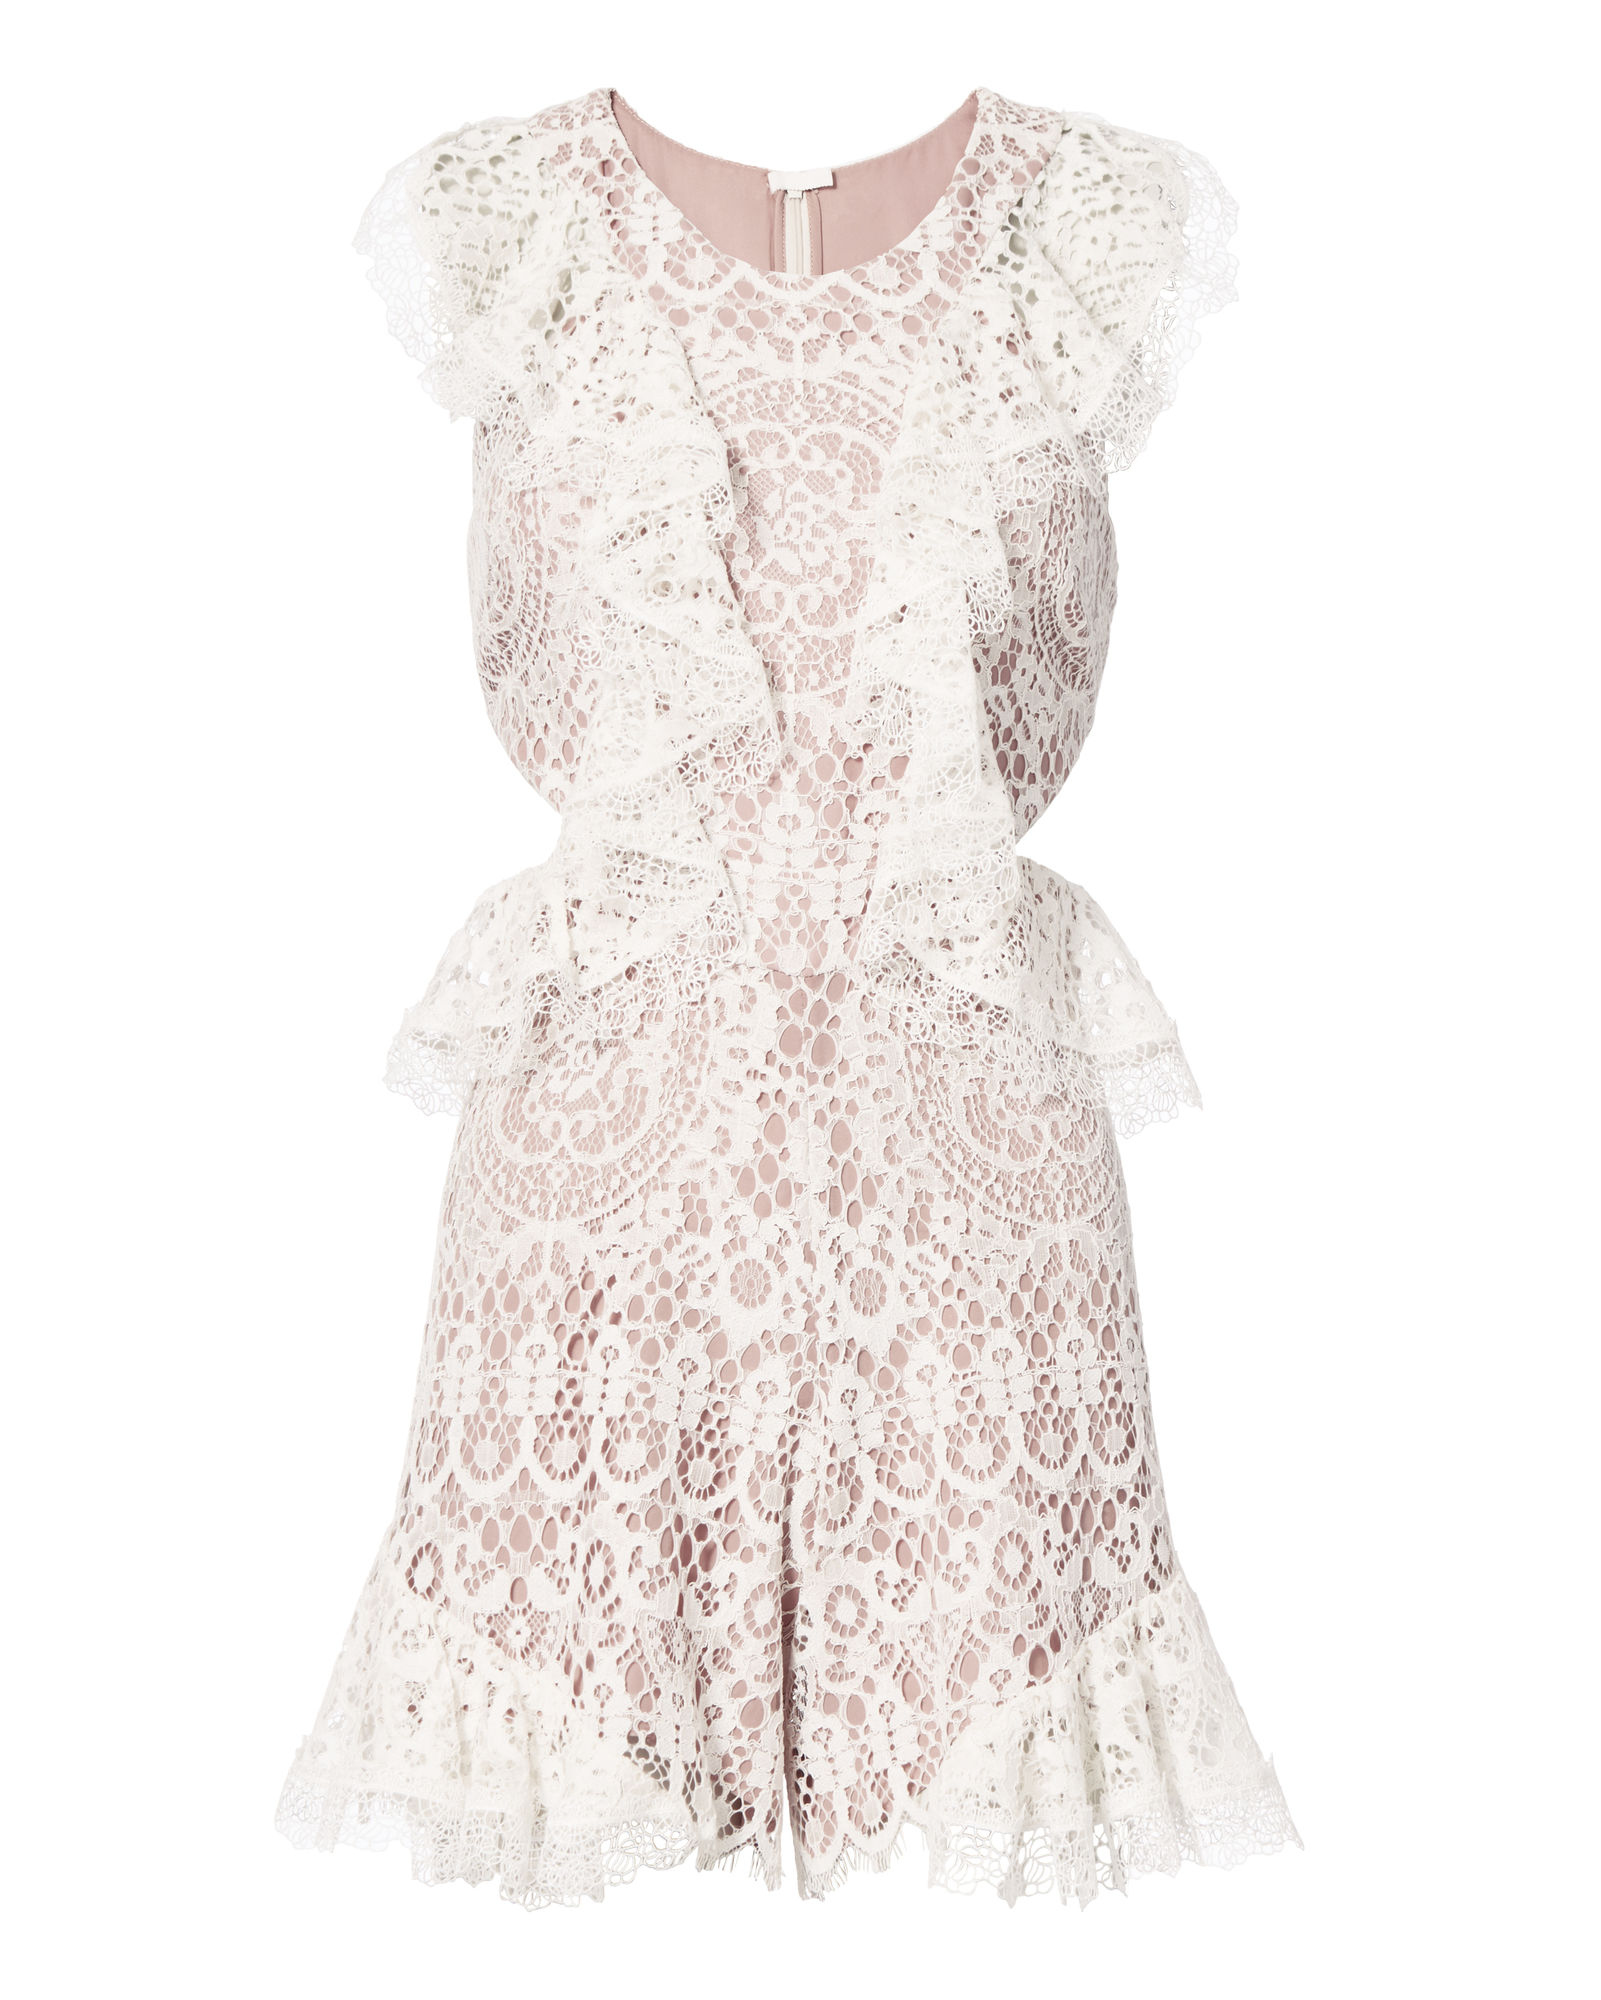 Alexis Woman Cutout Ruffled Corded Lace Playsuit White | ModeSens